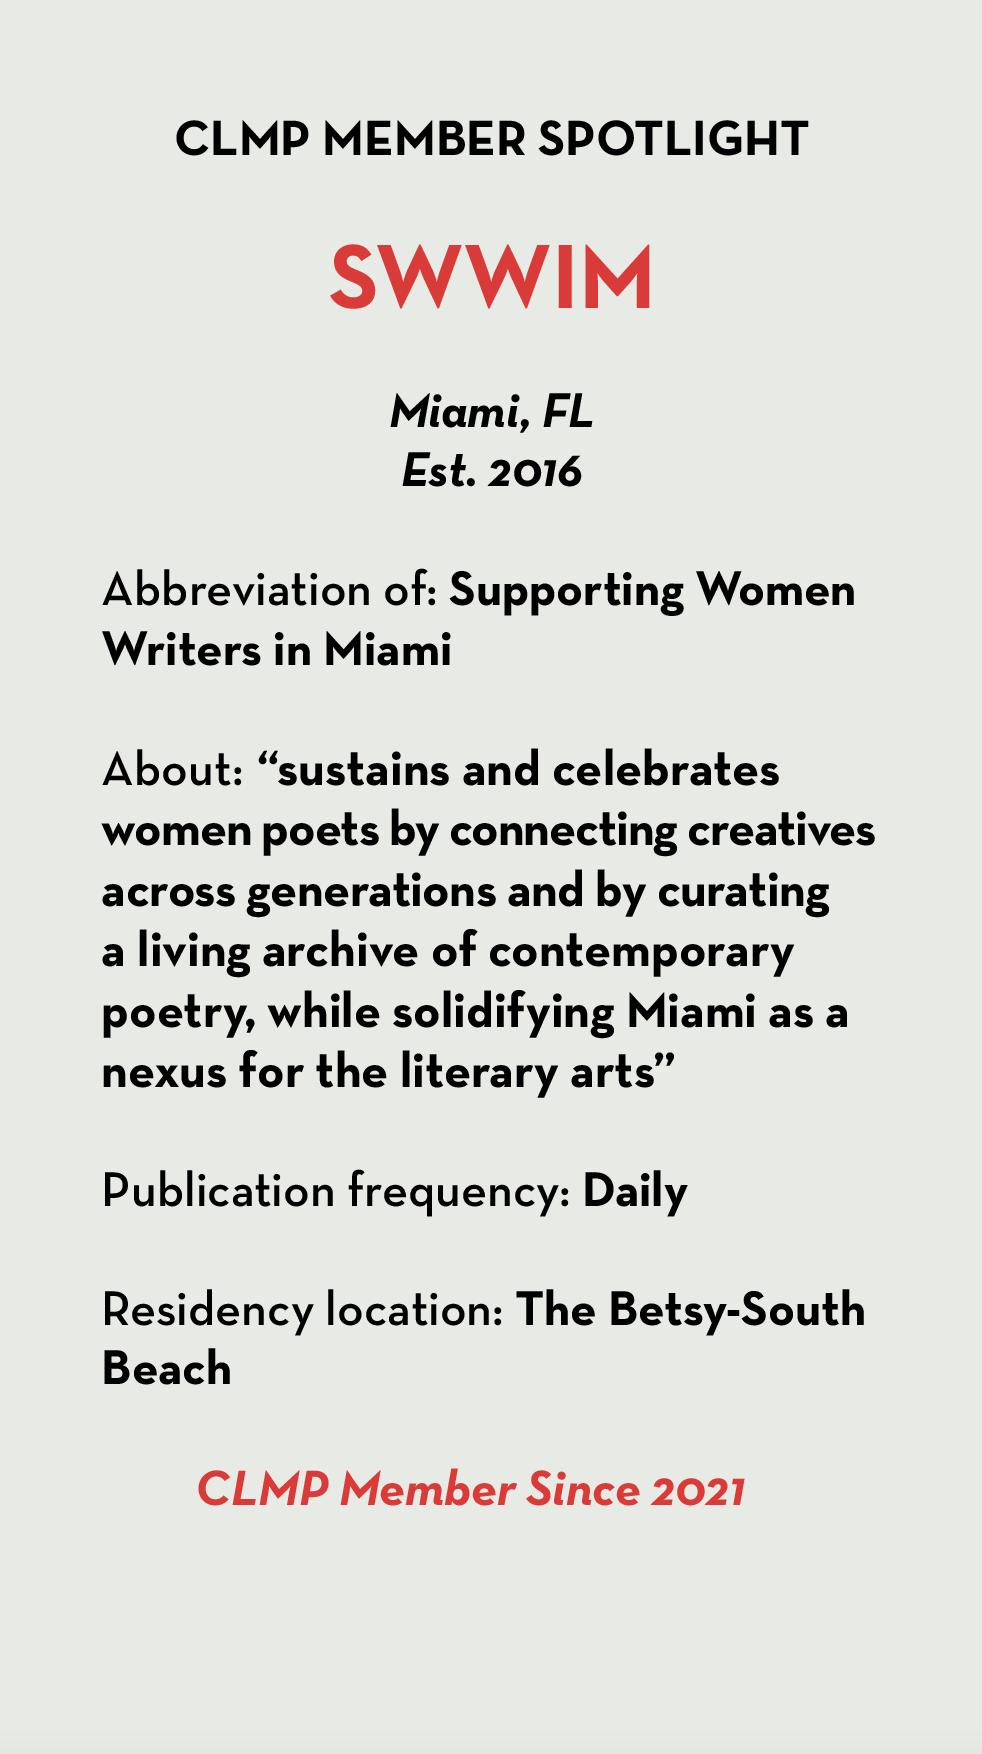 SWWIM Miami, FL Est. 2016 Abbreviation of: Supporting Women Writers in Miami About: “sustains and celebrates women poets by connecting creatives across generations and by curating a living archive of contemporary poetry, while solidifying Miami as a nexus for the literary arts” Publication frequency: Daily Residency location: The Betsy-South Beach CLMP Member Since 2021